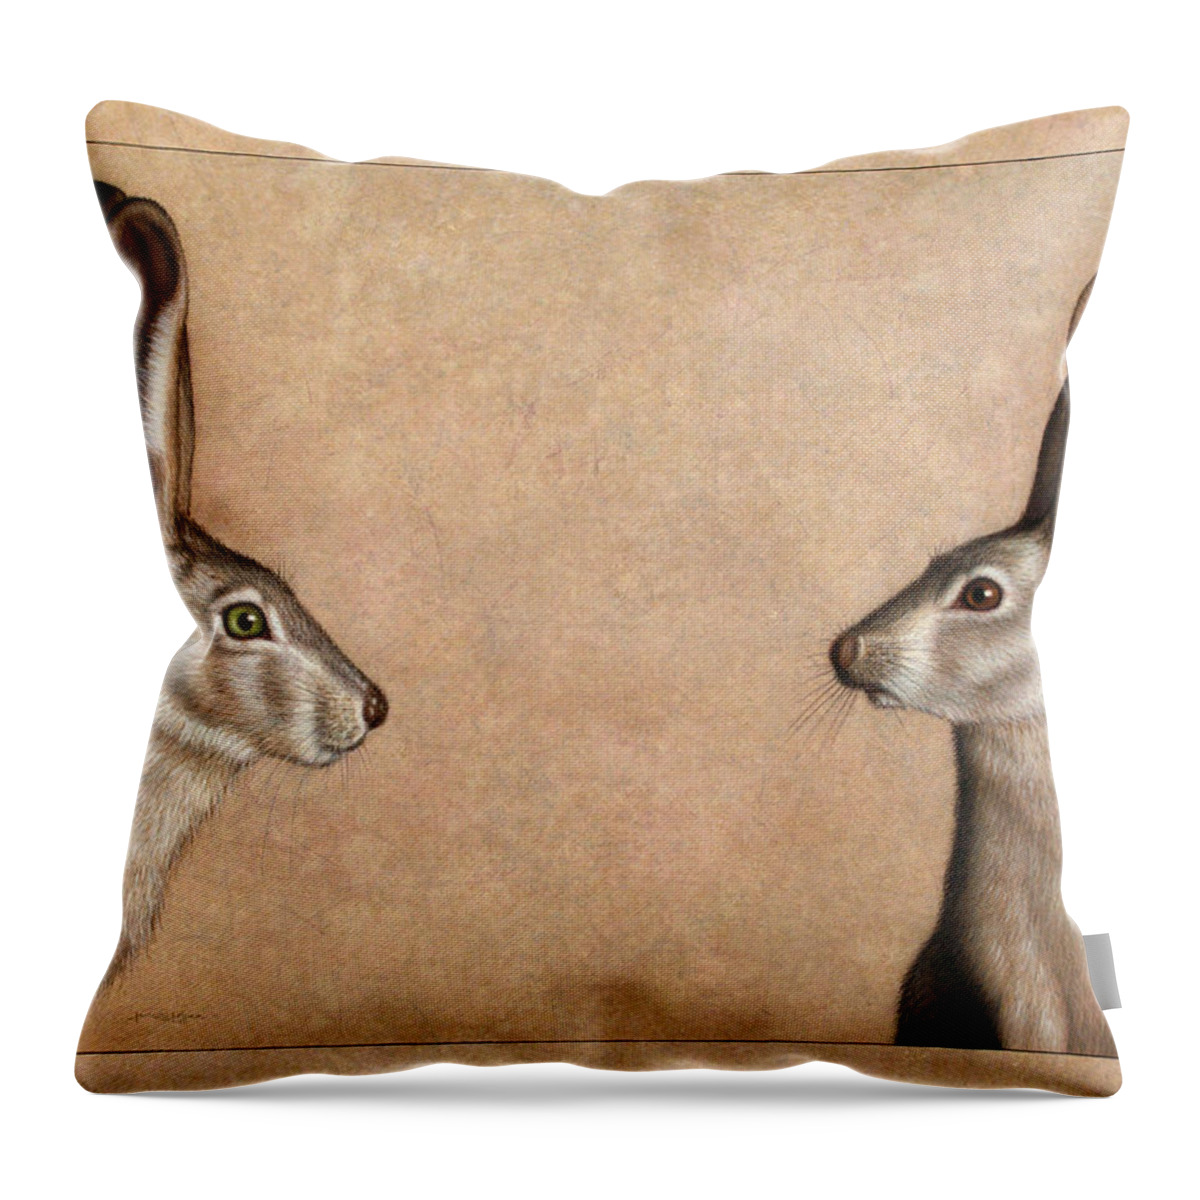 Jackrabbit Throw Pillow featuring the painting Jackrabbits by James W Johnson